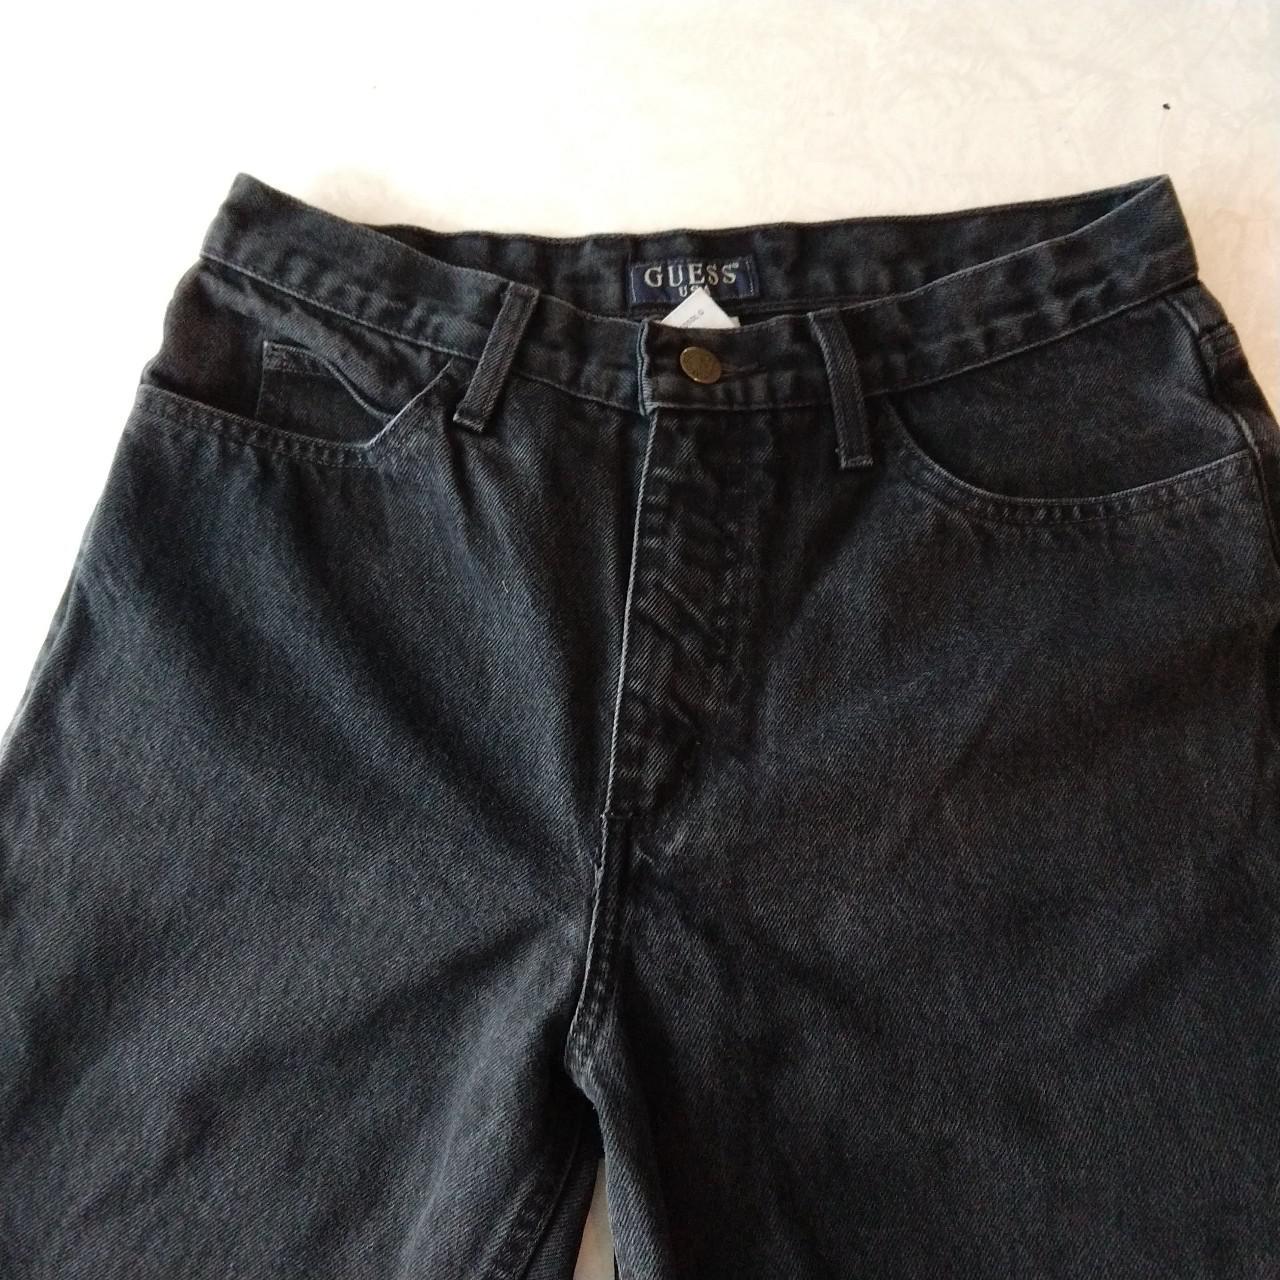 Product Image 4 - Vintage Guess jeans. Featuring the